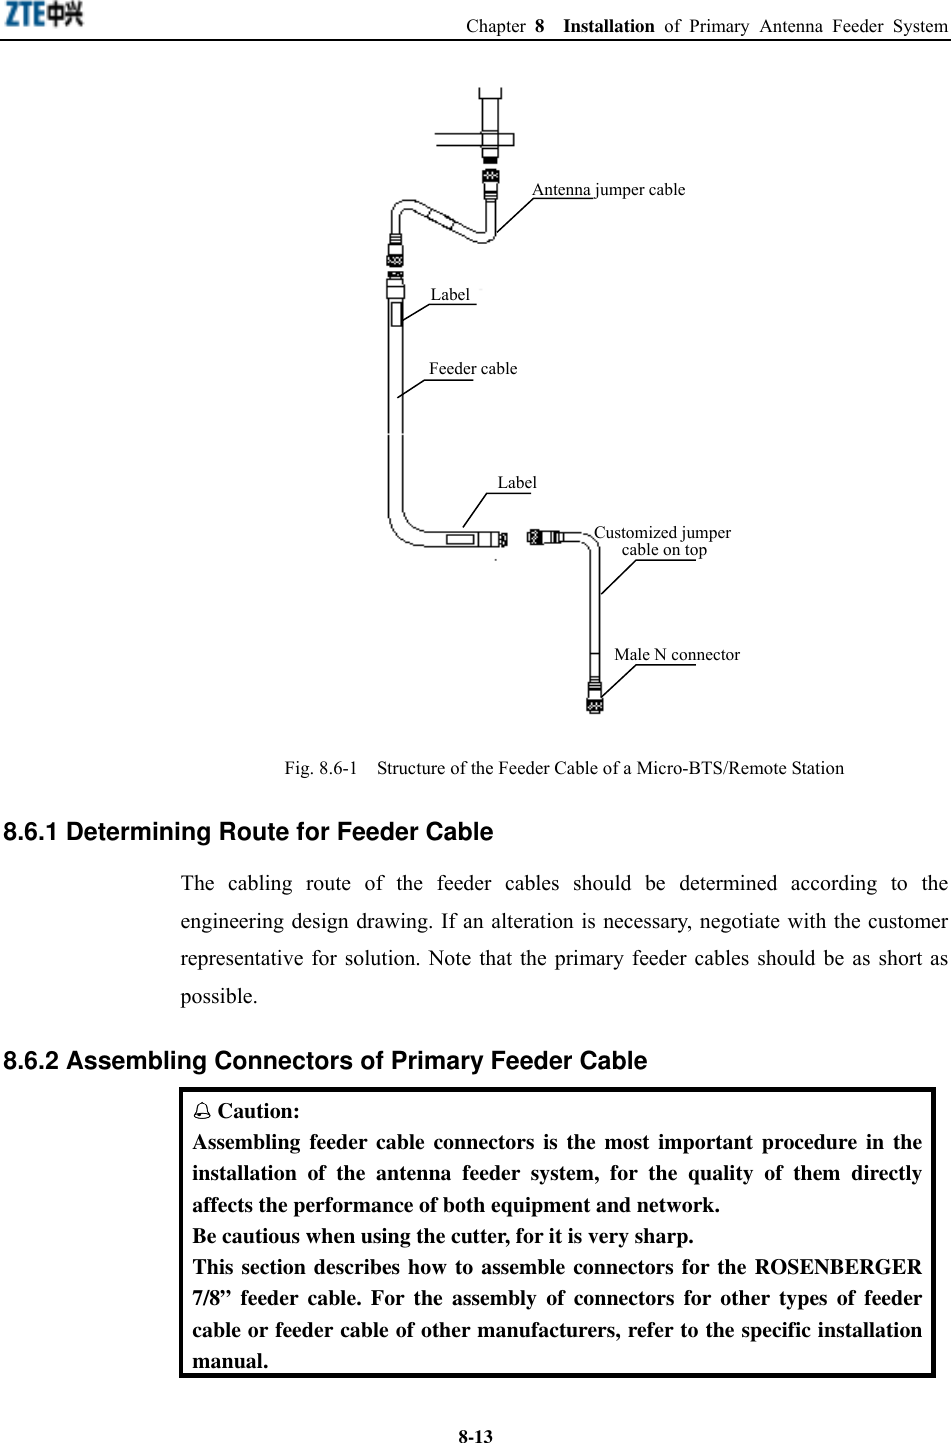  Chapter 8  Installation of Primary Antenna Feeder System  8-13LabelAntenna jumper cableCustomized jumpercable on topLabelFeeder cableMale N connector Fig. 8.6-1    Structure of the Feeder Cable of a Micro-BTS/Remote Station 8.6.1 Determining Route for Feeder Cable The cabling route of the feeder cables should be determined according to the engineering design drawing. If an alteration is necessary, negotiate with the customer representative for solution. Note that the primary feeder cables should be as short as possible. 8.6.2 Assembling Connectors of Primary Feeder Cable  Caution: Assembling feeder cable connectors is the most important procedure in the installation of the antenna feeder system, for the quality of them directly affects the performance of both equipment and network.   Be cautious when using the cutter, for it is very sharp. This section describes how to assemble connectors for the ROSENBERGER 7/8” feeder cable. For the assembly of connectors for other types of feeder cable or feeder cable of other manufacturers, refer to the specific installation manual. 